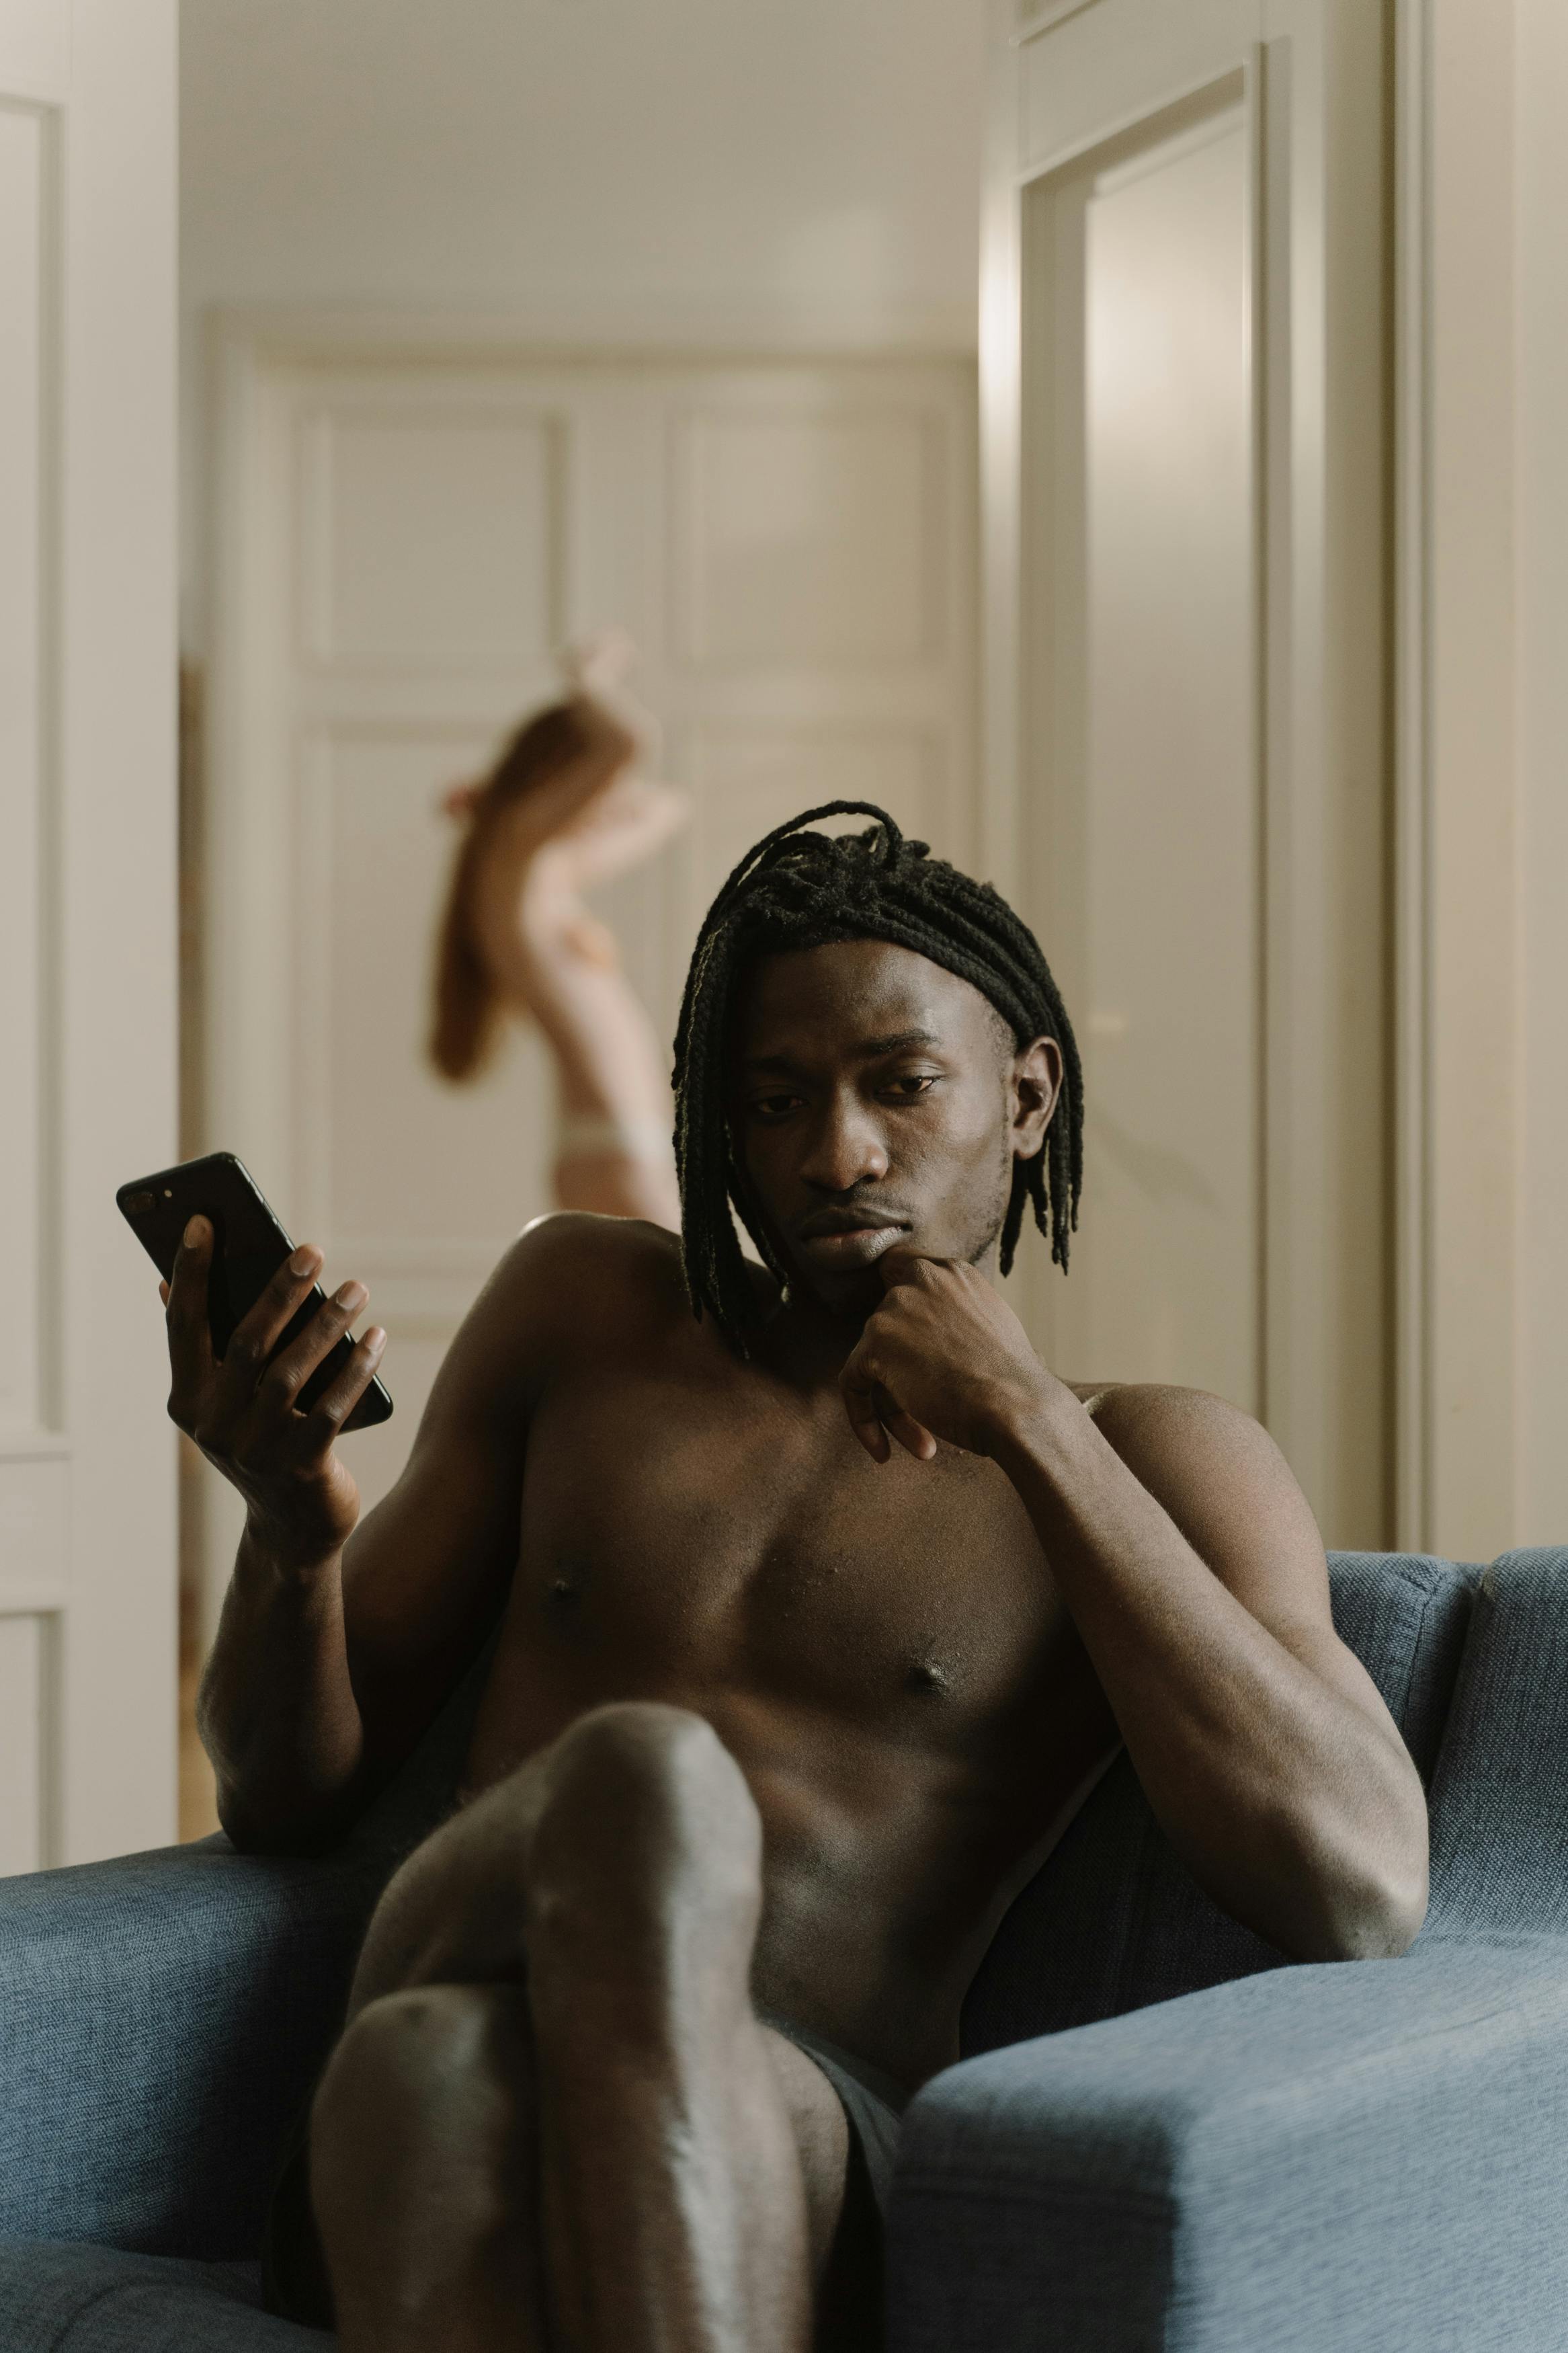 a shirtless man sitting on an armchair holding a smartphone